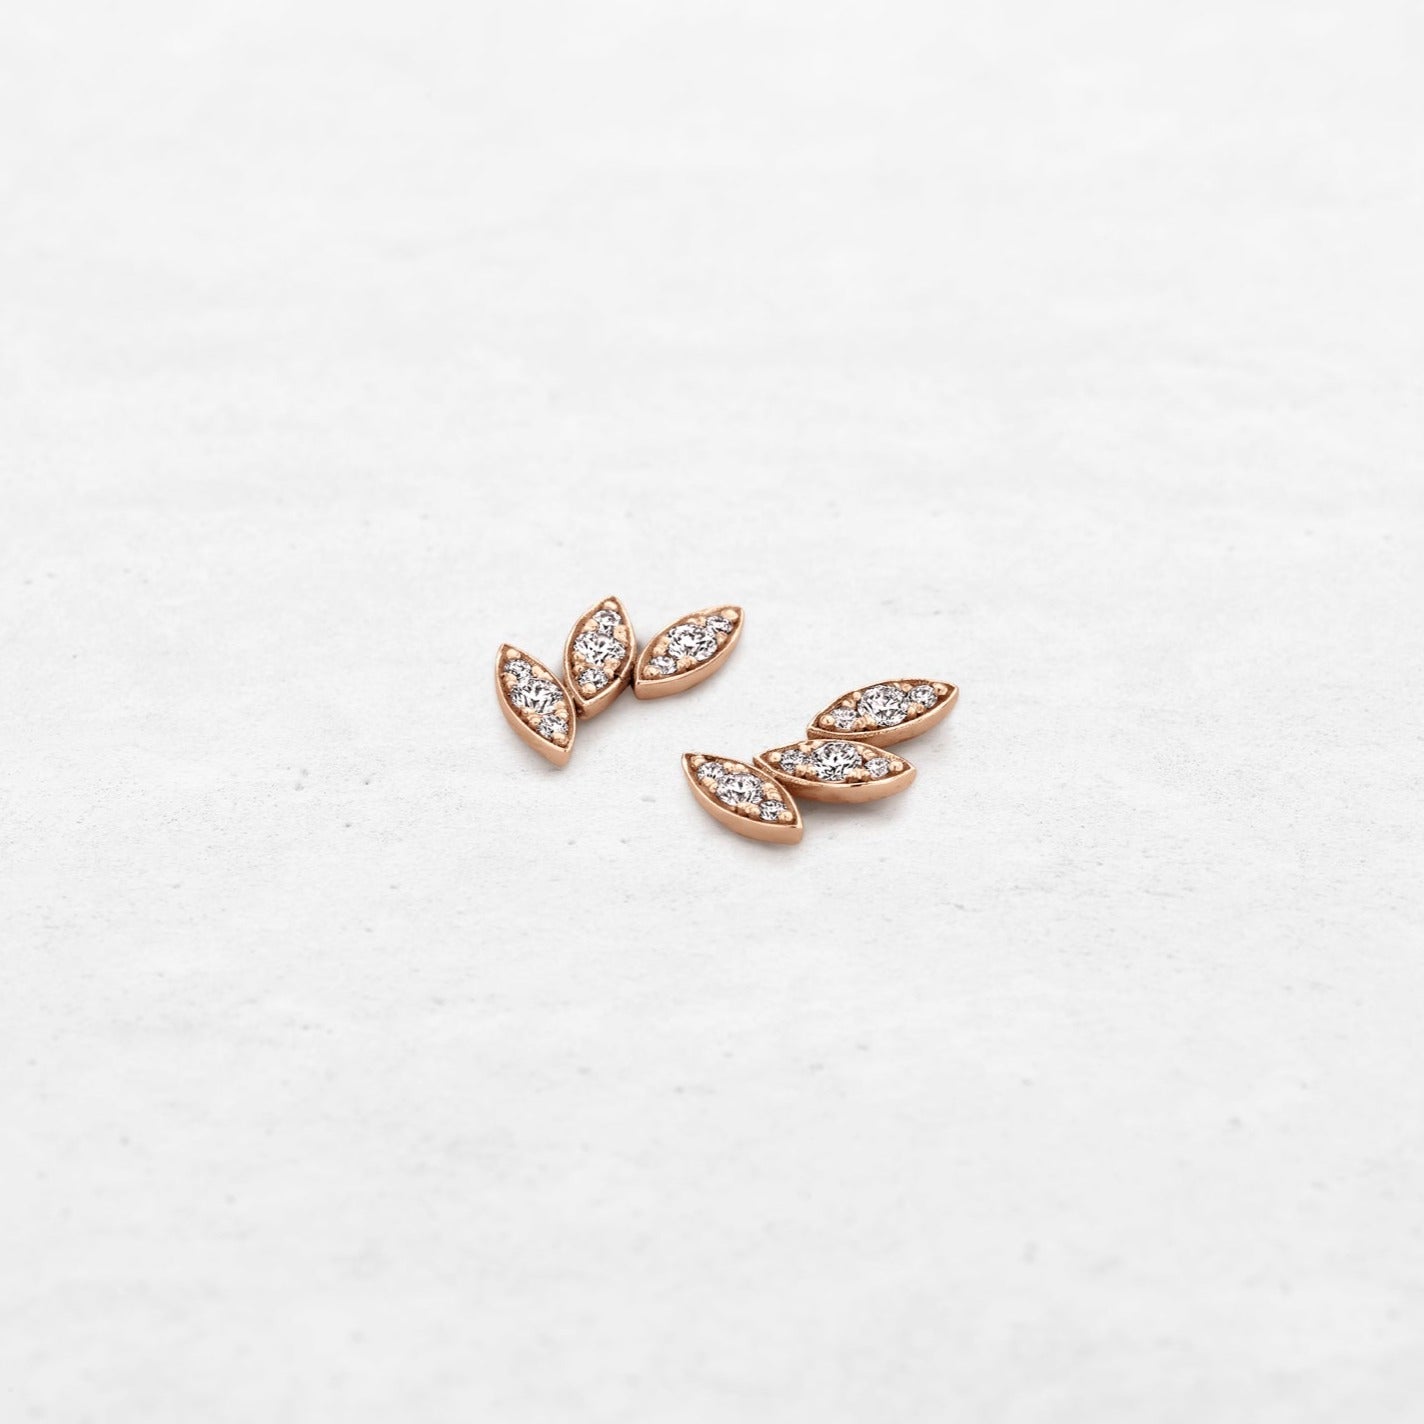 Triple diamond leaf earring studs in rose gold made by O! Jewelry